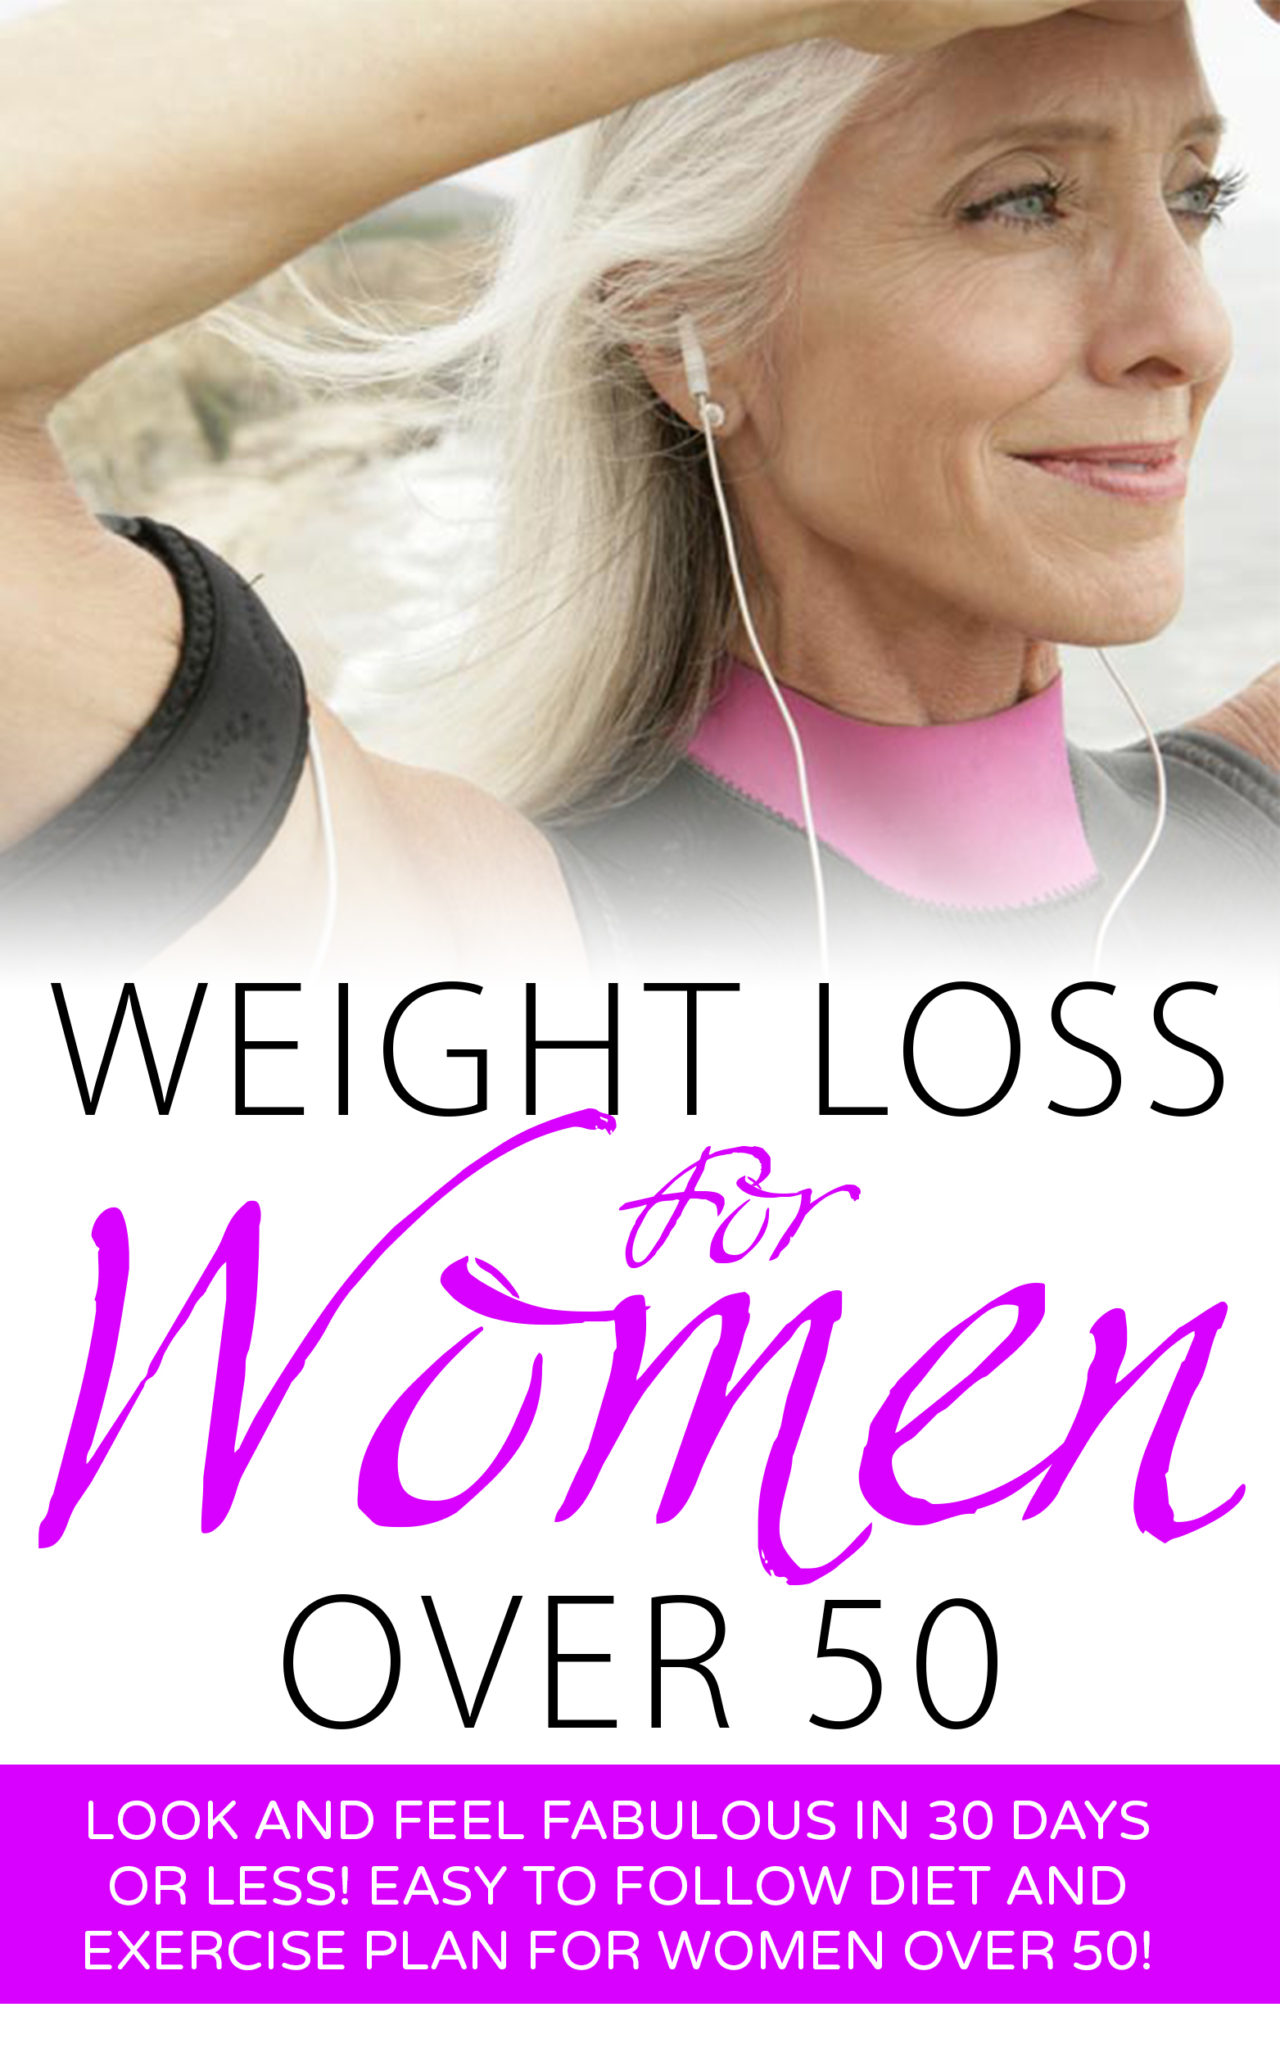 FREE: Weight Loss for Women Over 50: Look and Feel Fabulous in 30 Days or Less! Easy to Follow Diet and Exercise Plan for Women Over 50 by Emily MacLeod